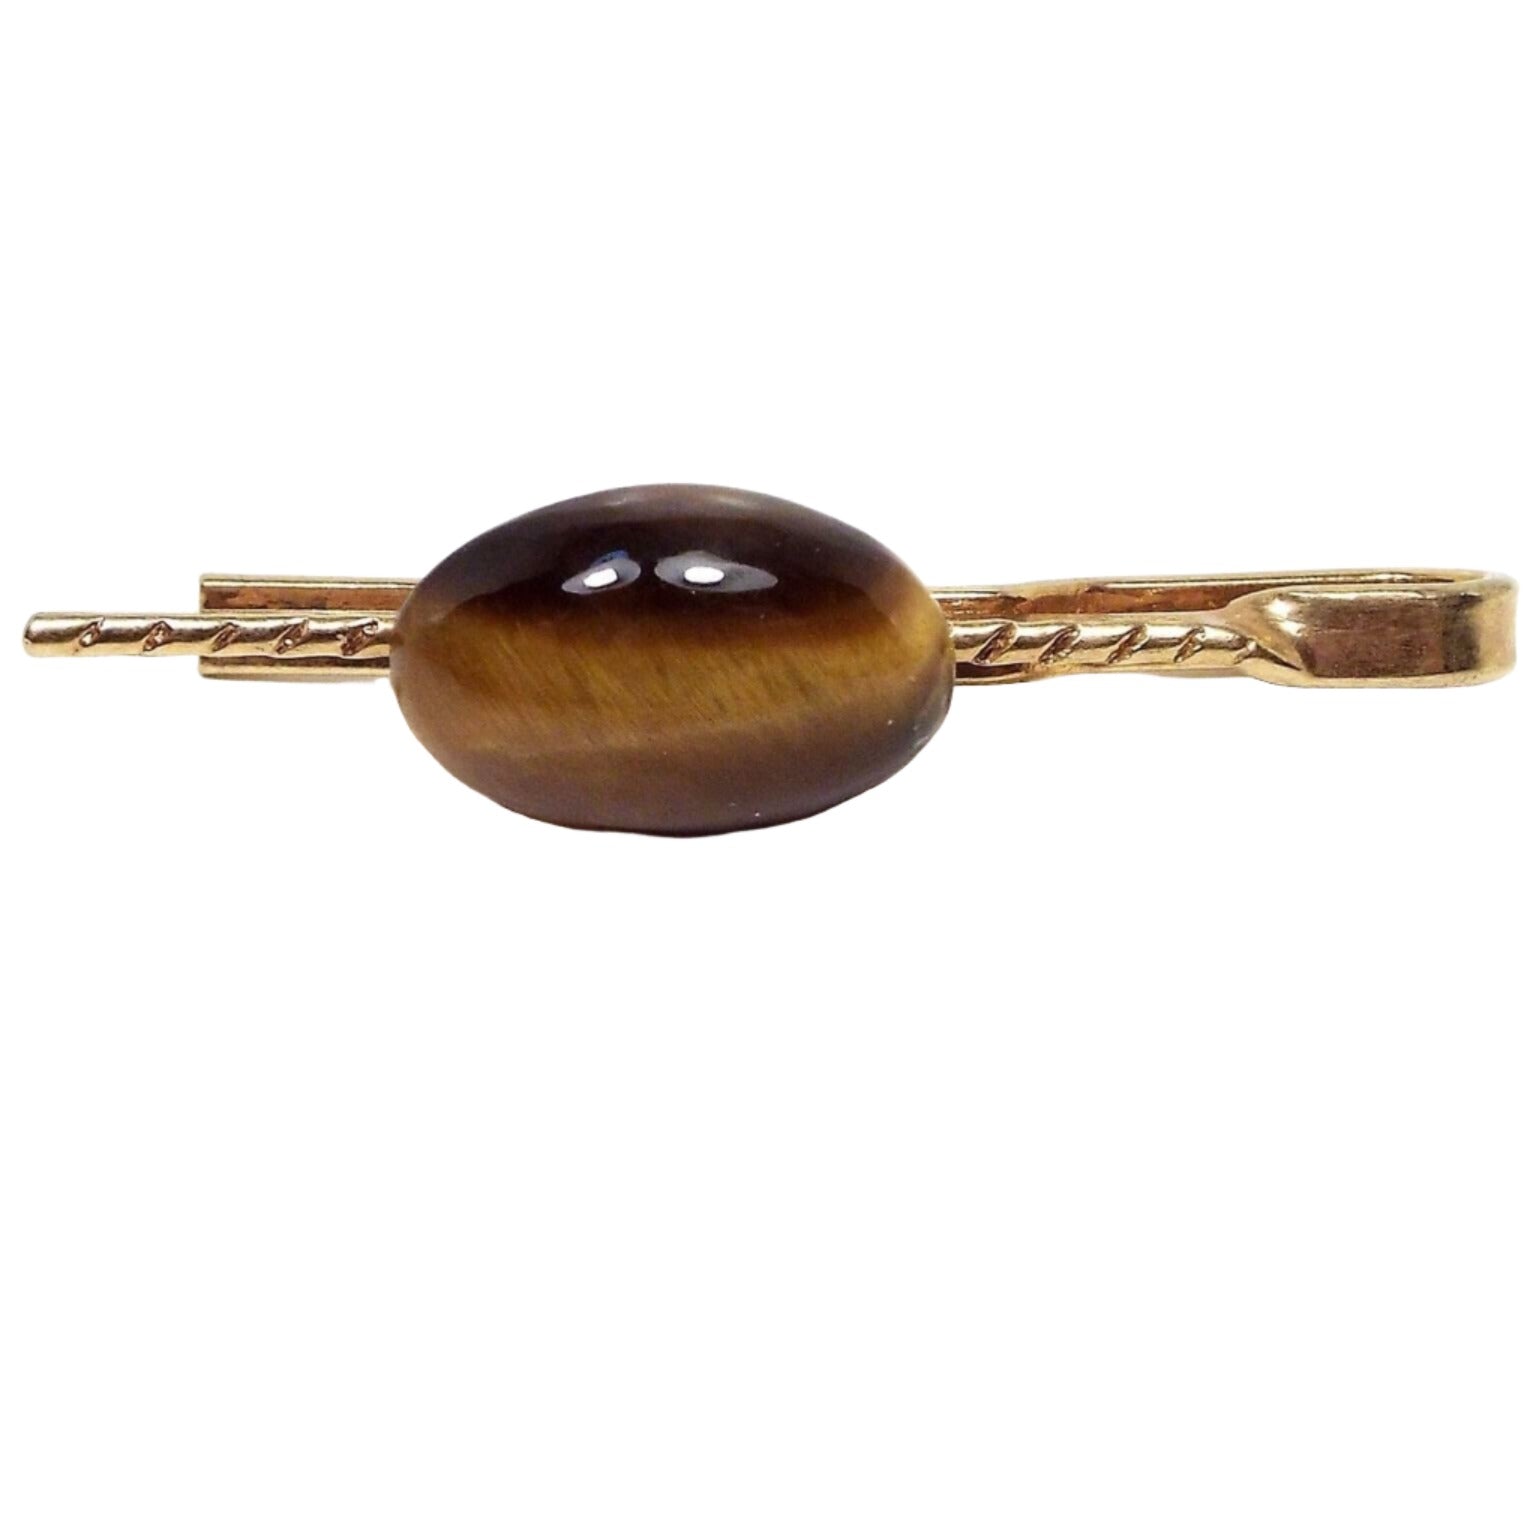 Front view of the retro vintage slide on gemstone tie bar. The metal is gold tone in color. The front has a thin metal bar with a diagonal line etched design on it. The bar flattens at the end and curves around the back of the tie bar. There is a domed oval tiger's eye cab attached to the front with striped shades of yellow and brown.